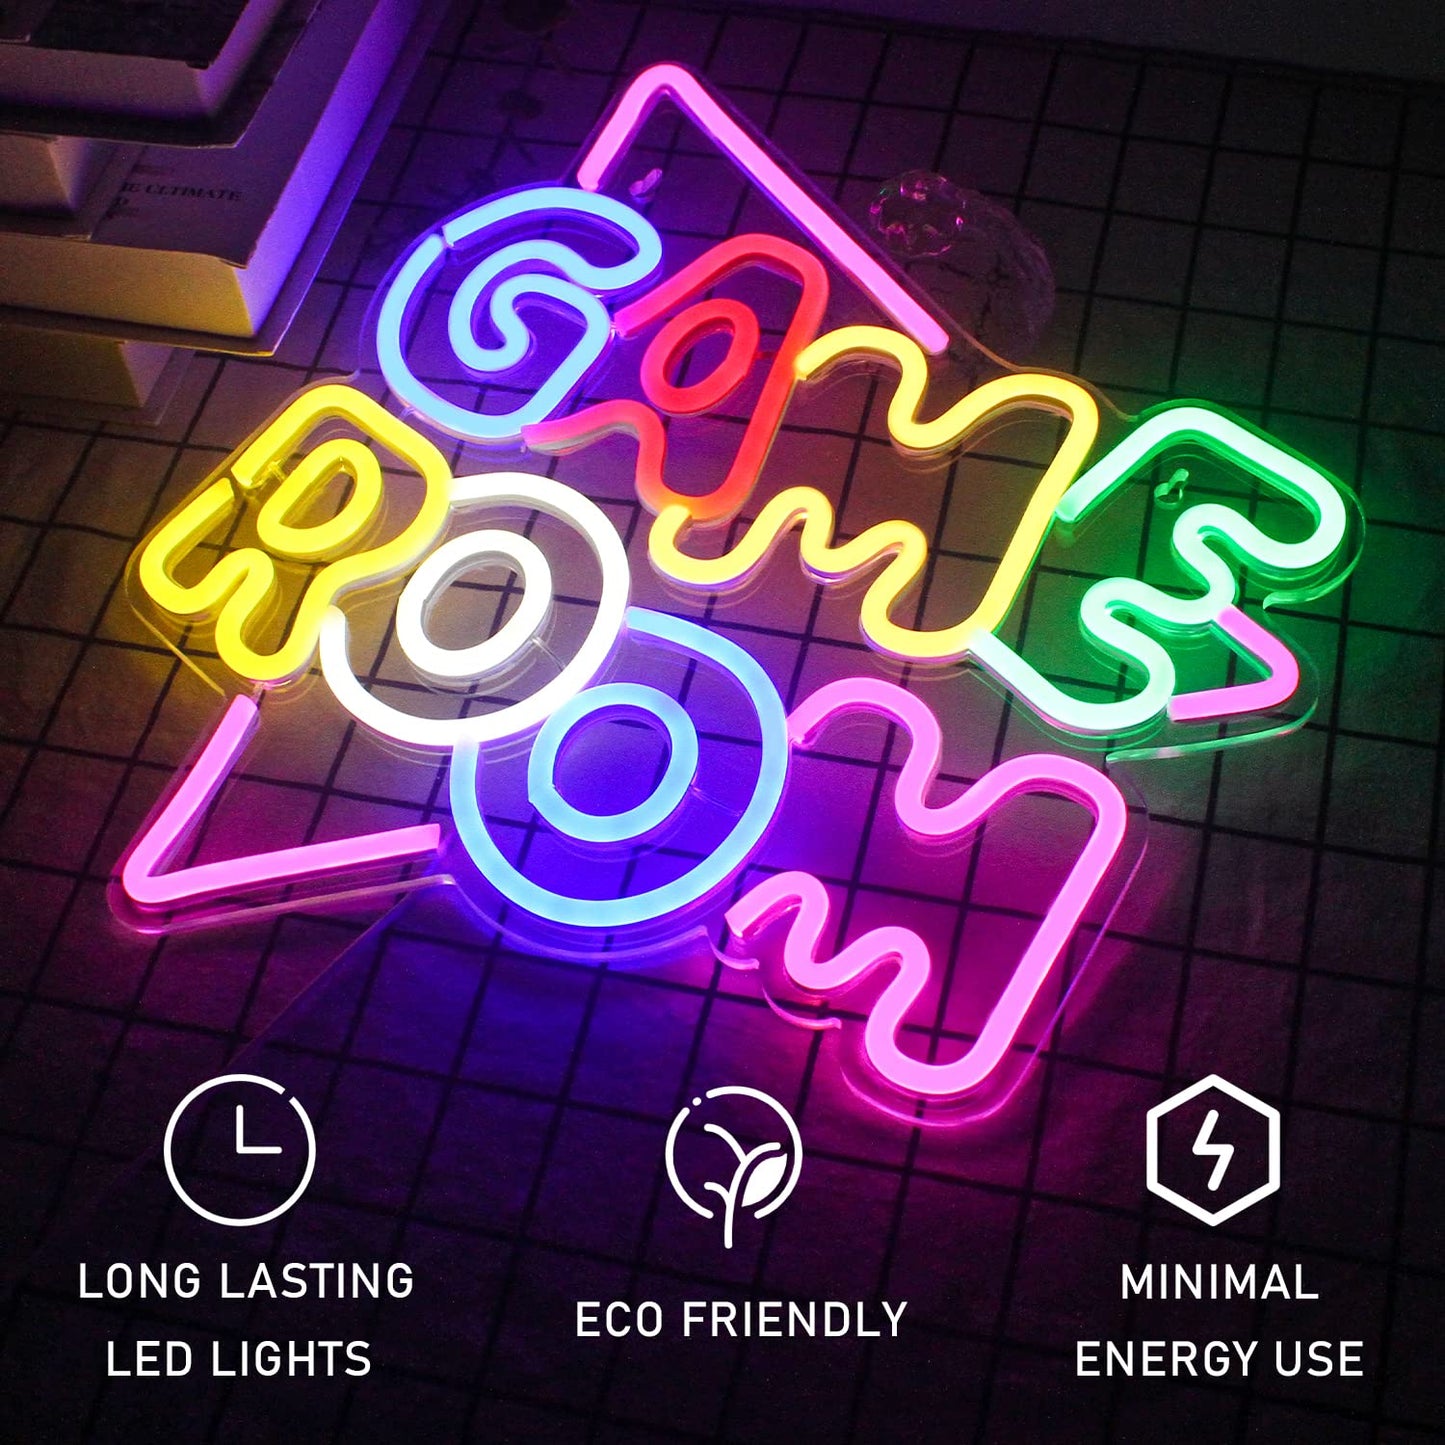 Gamerneon Game Room Large Neon Signs 13.2"x14" Colorful LED ,USB Neon Lights for Game Zone Party Decor Bedroom Gaming Wall Lightup Signs - amzGamess